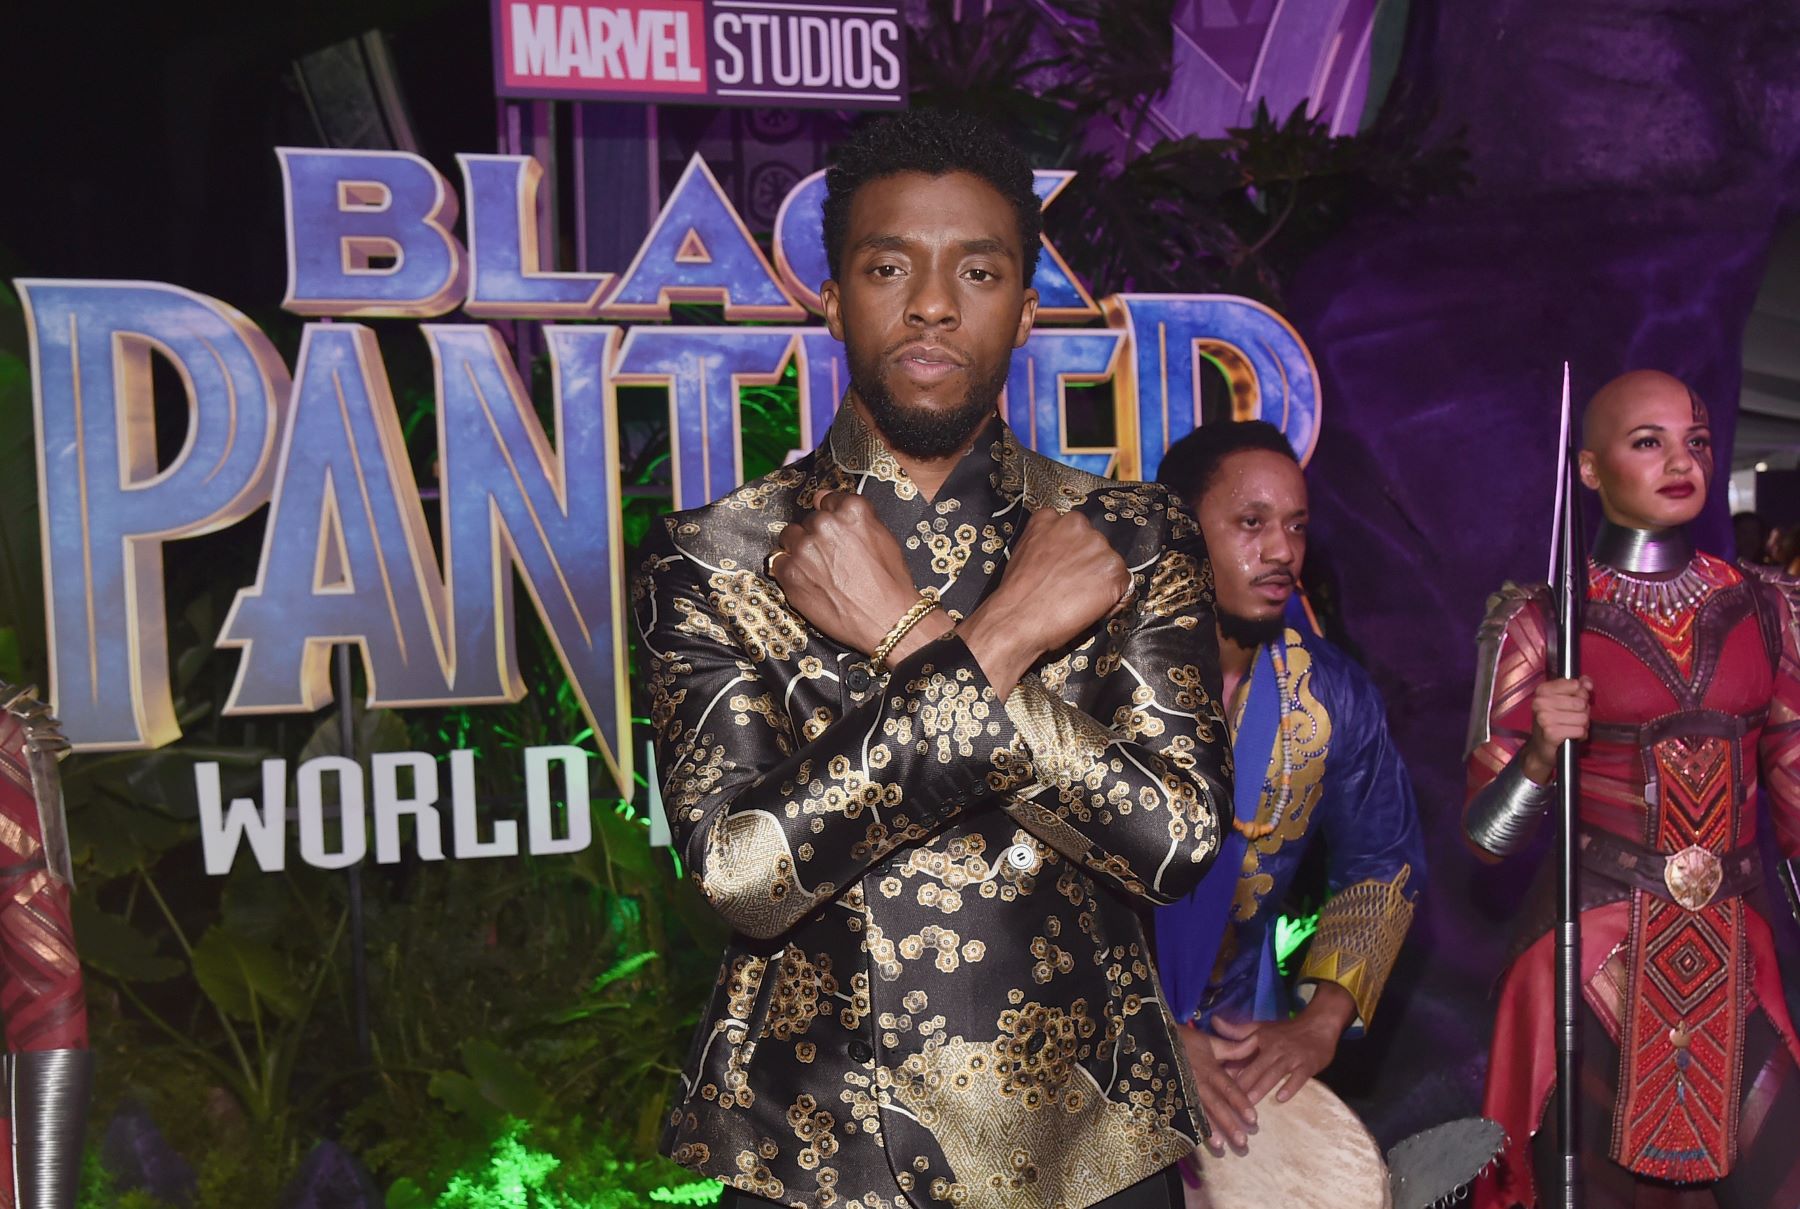 'What If...?' finale star Chadwick Boseman, who voices Star-Lord T'Challa, wears a black and gold jacket and crosses his arms over his chest.